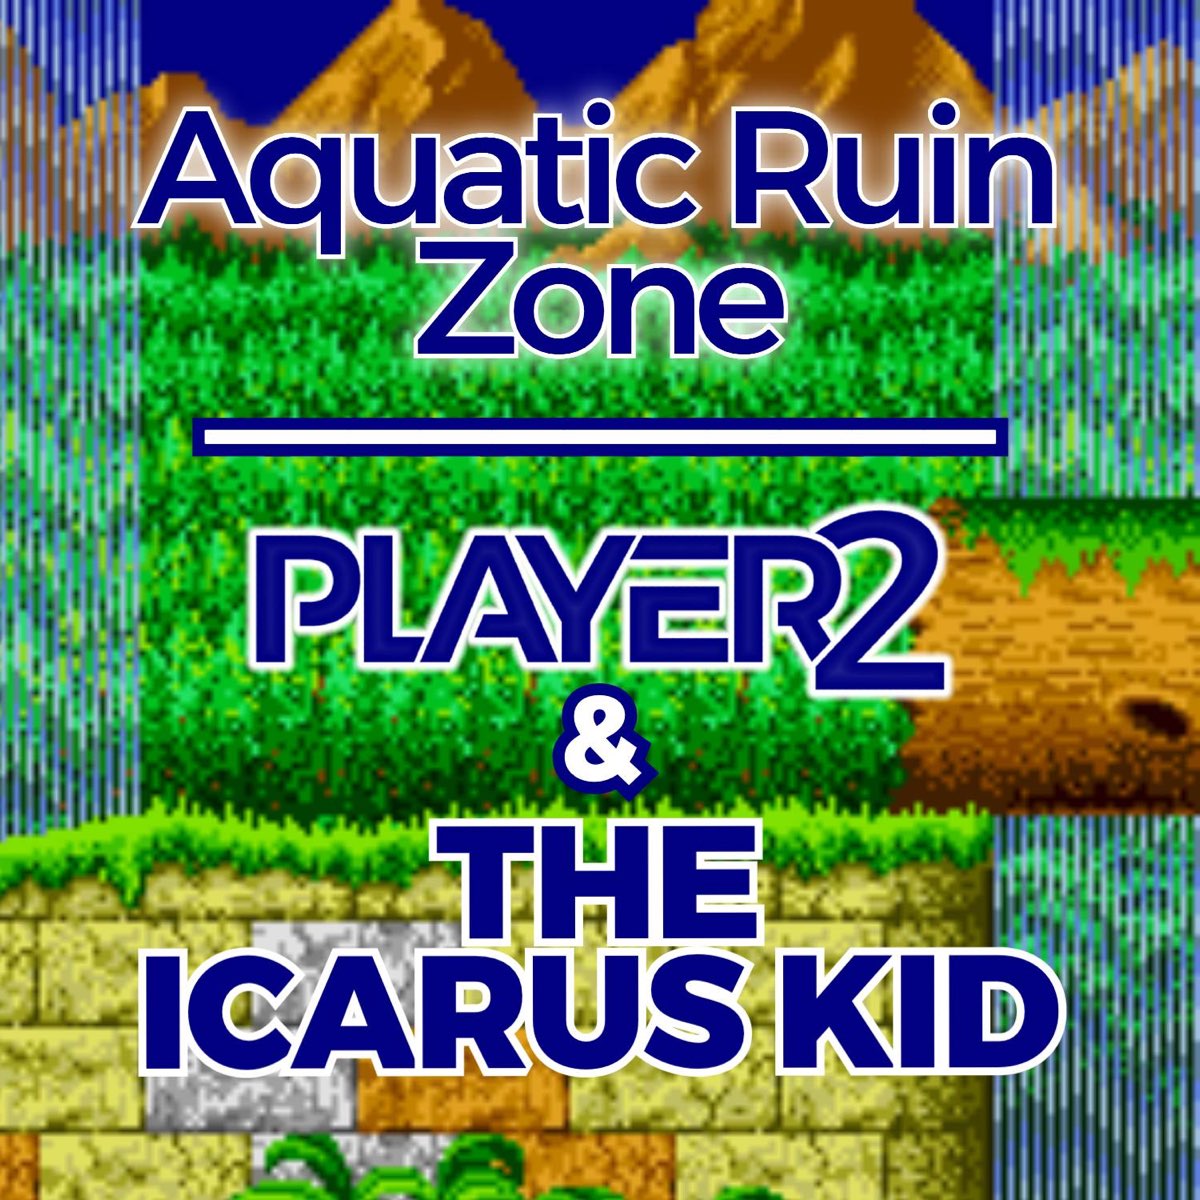 Aquatic Ruin Zone (From "Sonic 2") [Remix] - Single - Album by Player2 &  The Icarus Kid - Apple Music